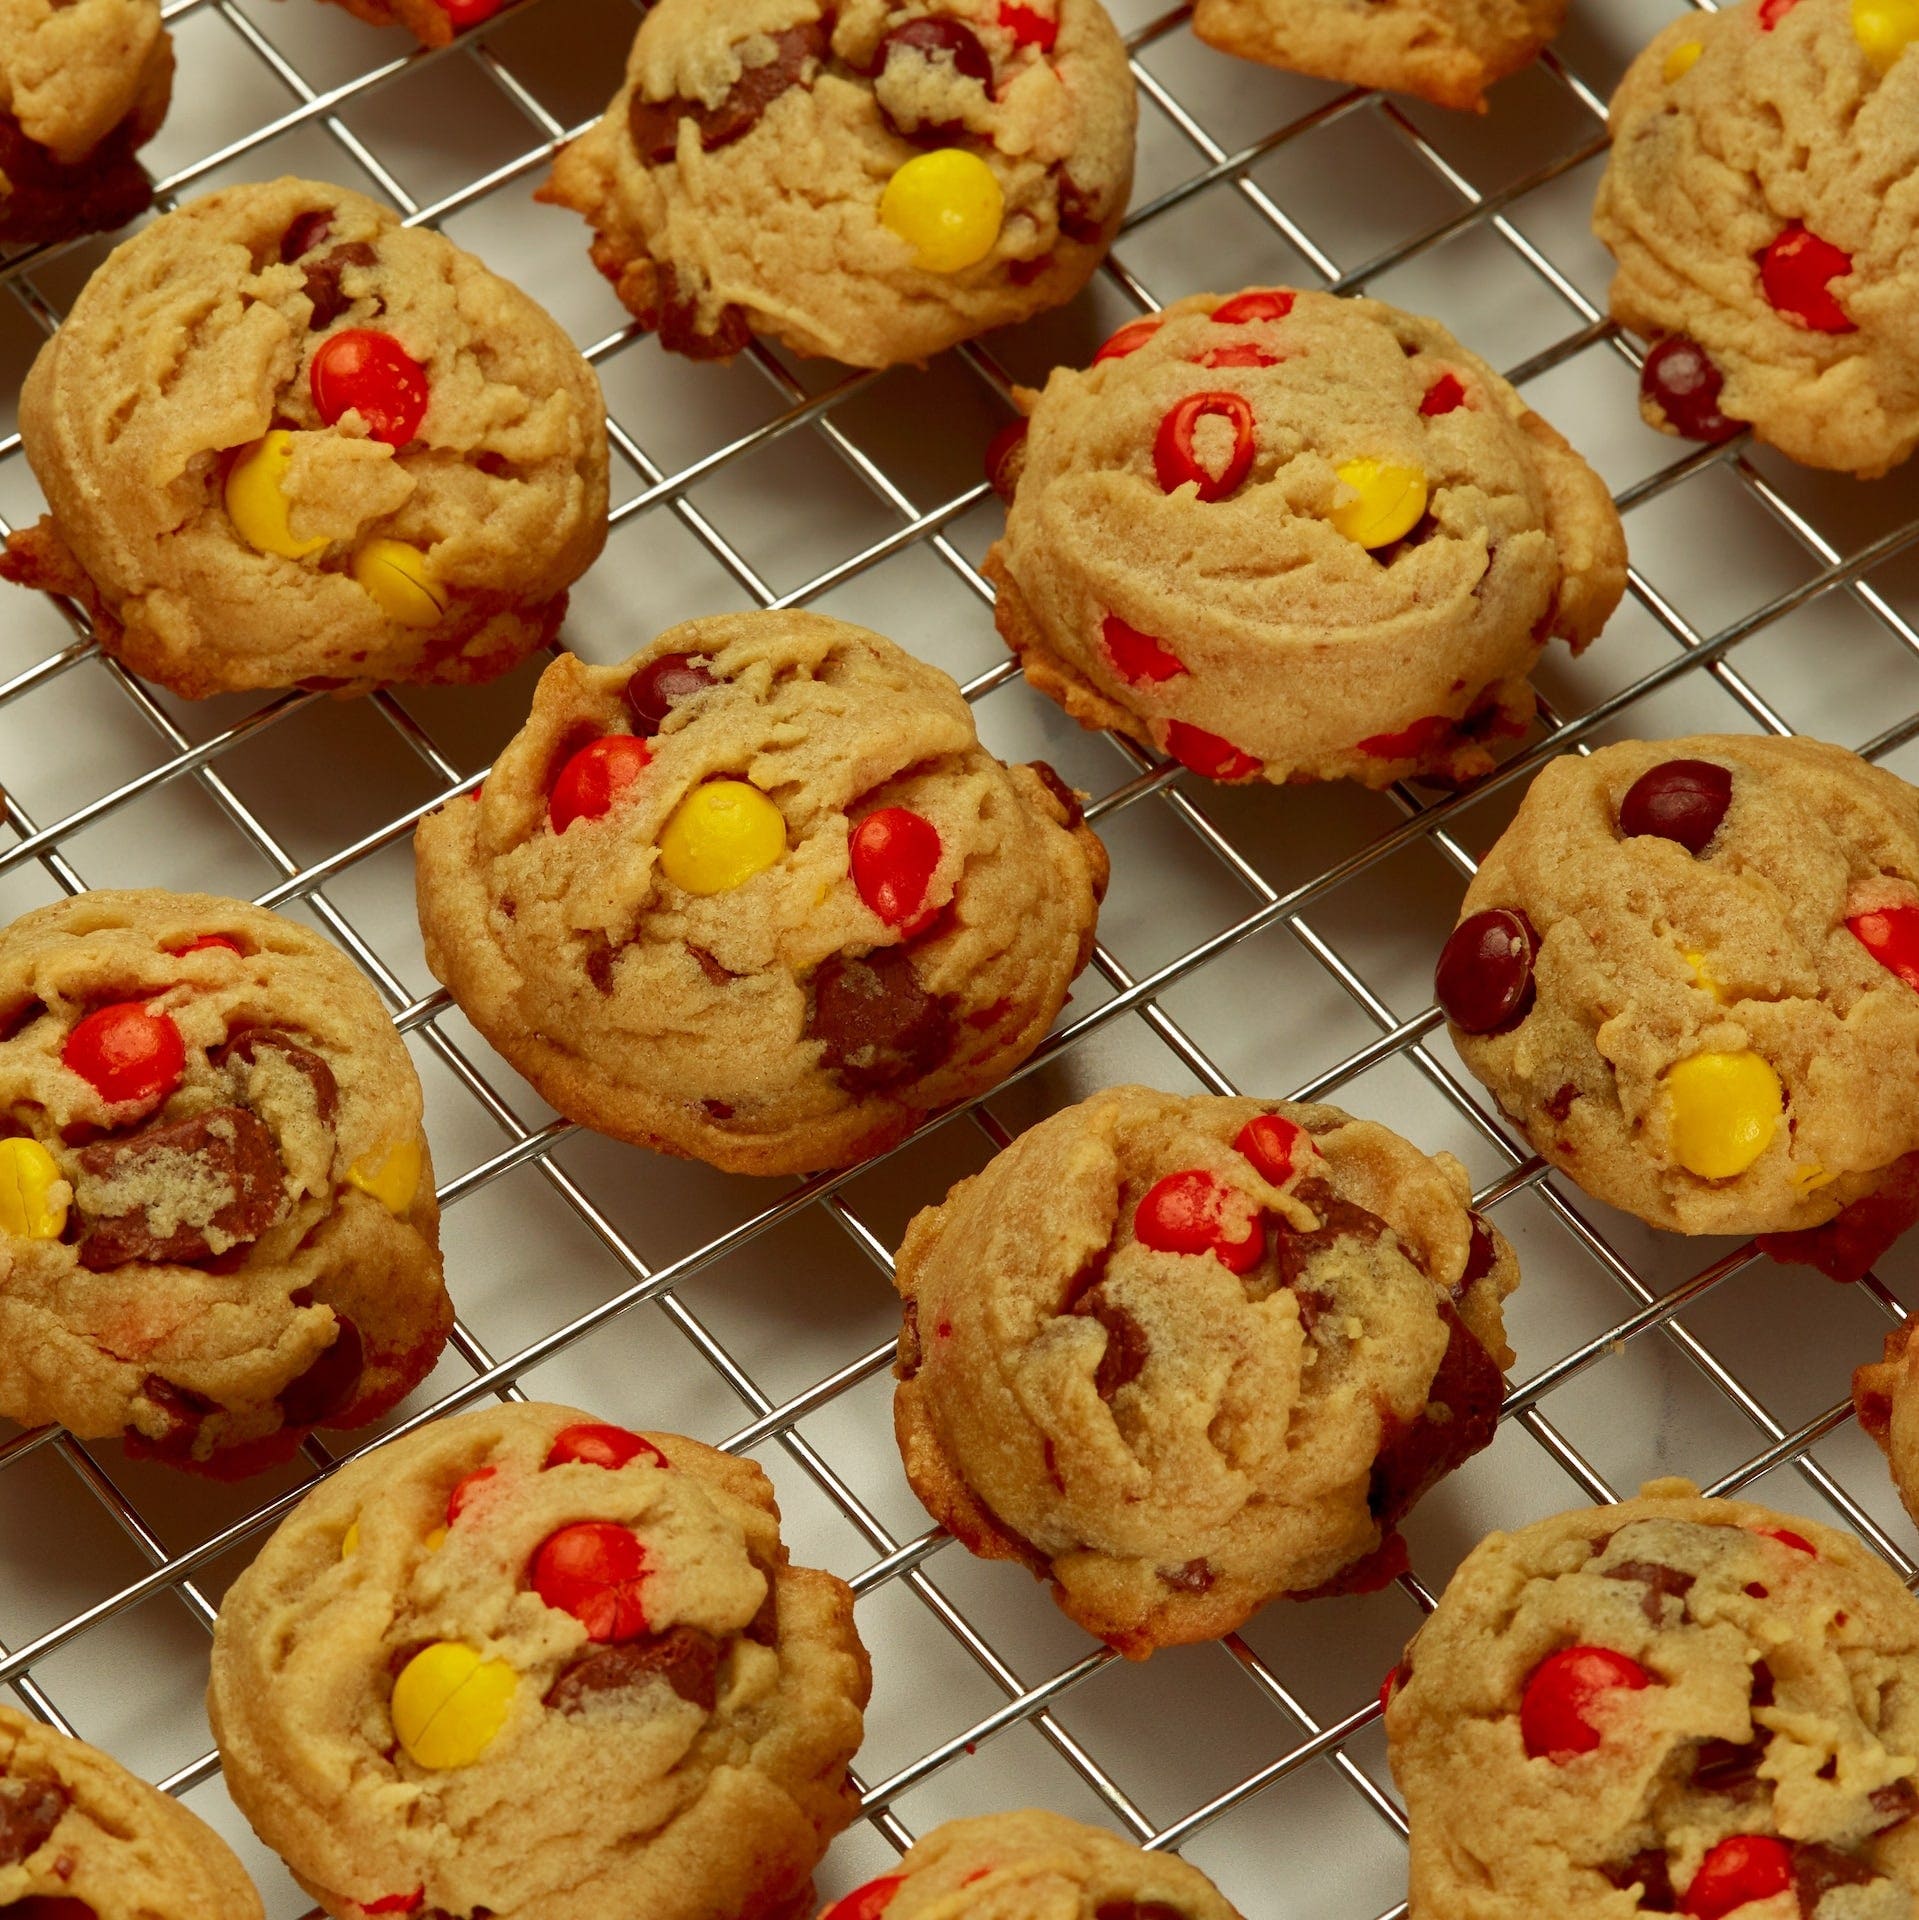 REESE'S PIECES Chocolate Bar Peanut Butter Cookies